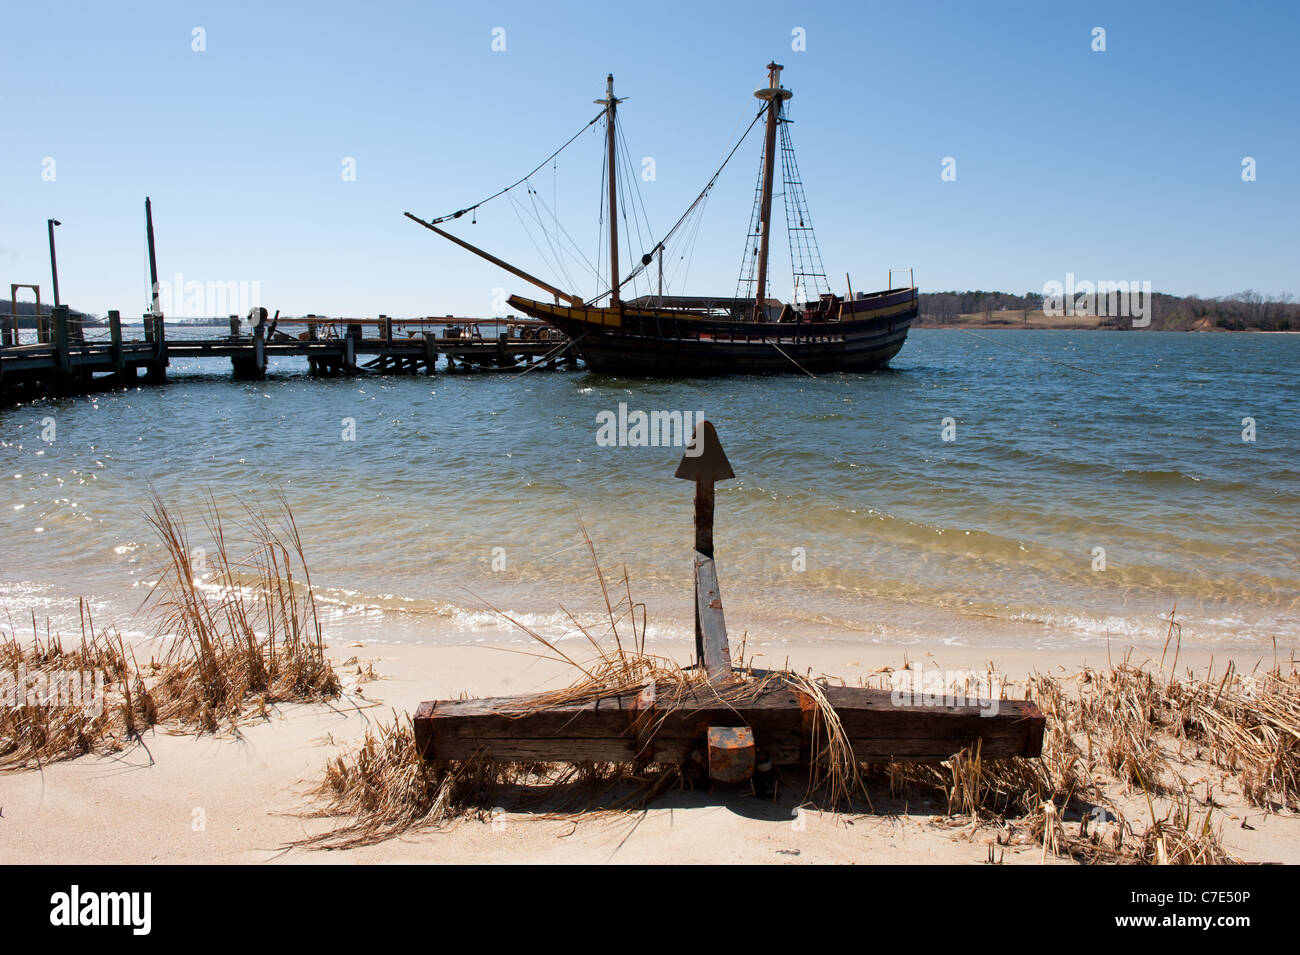 Anchor on a beach with ship docked in background Stock Photo